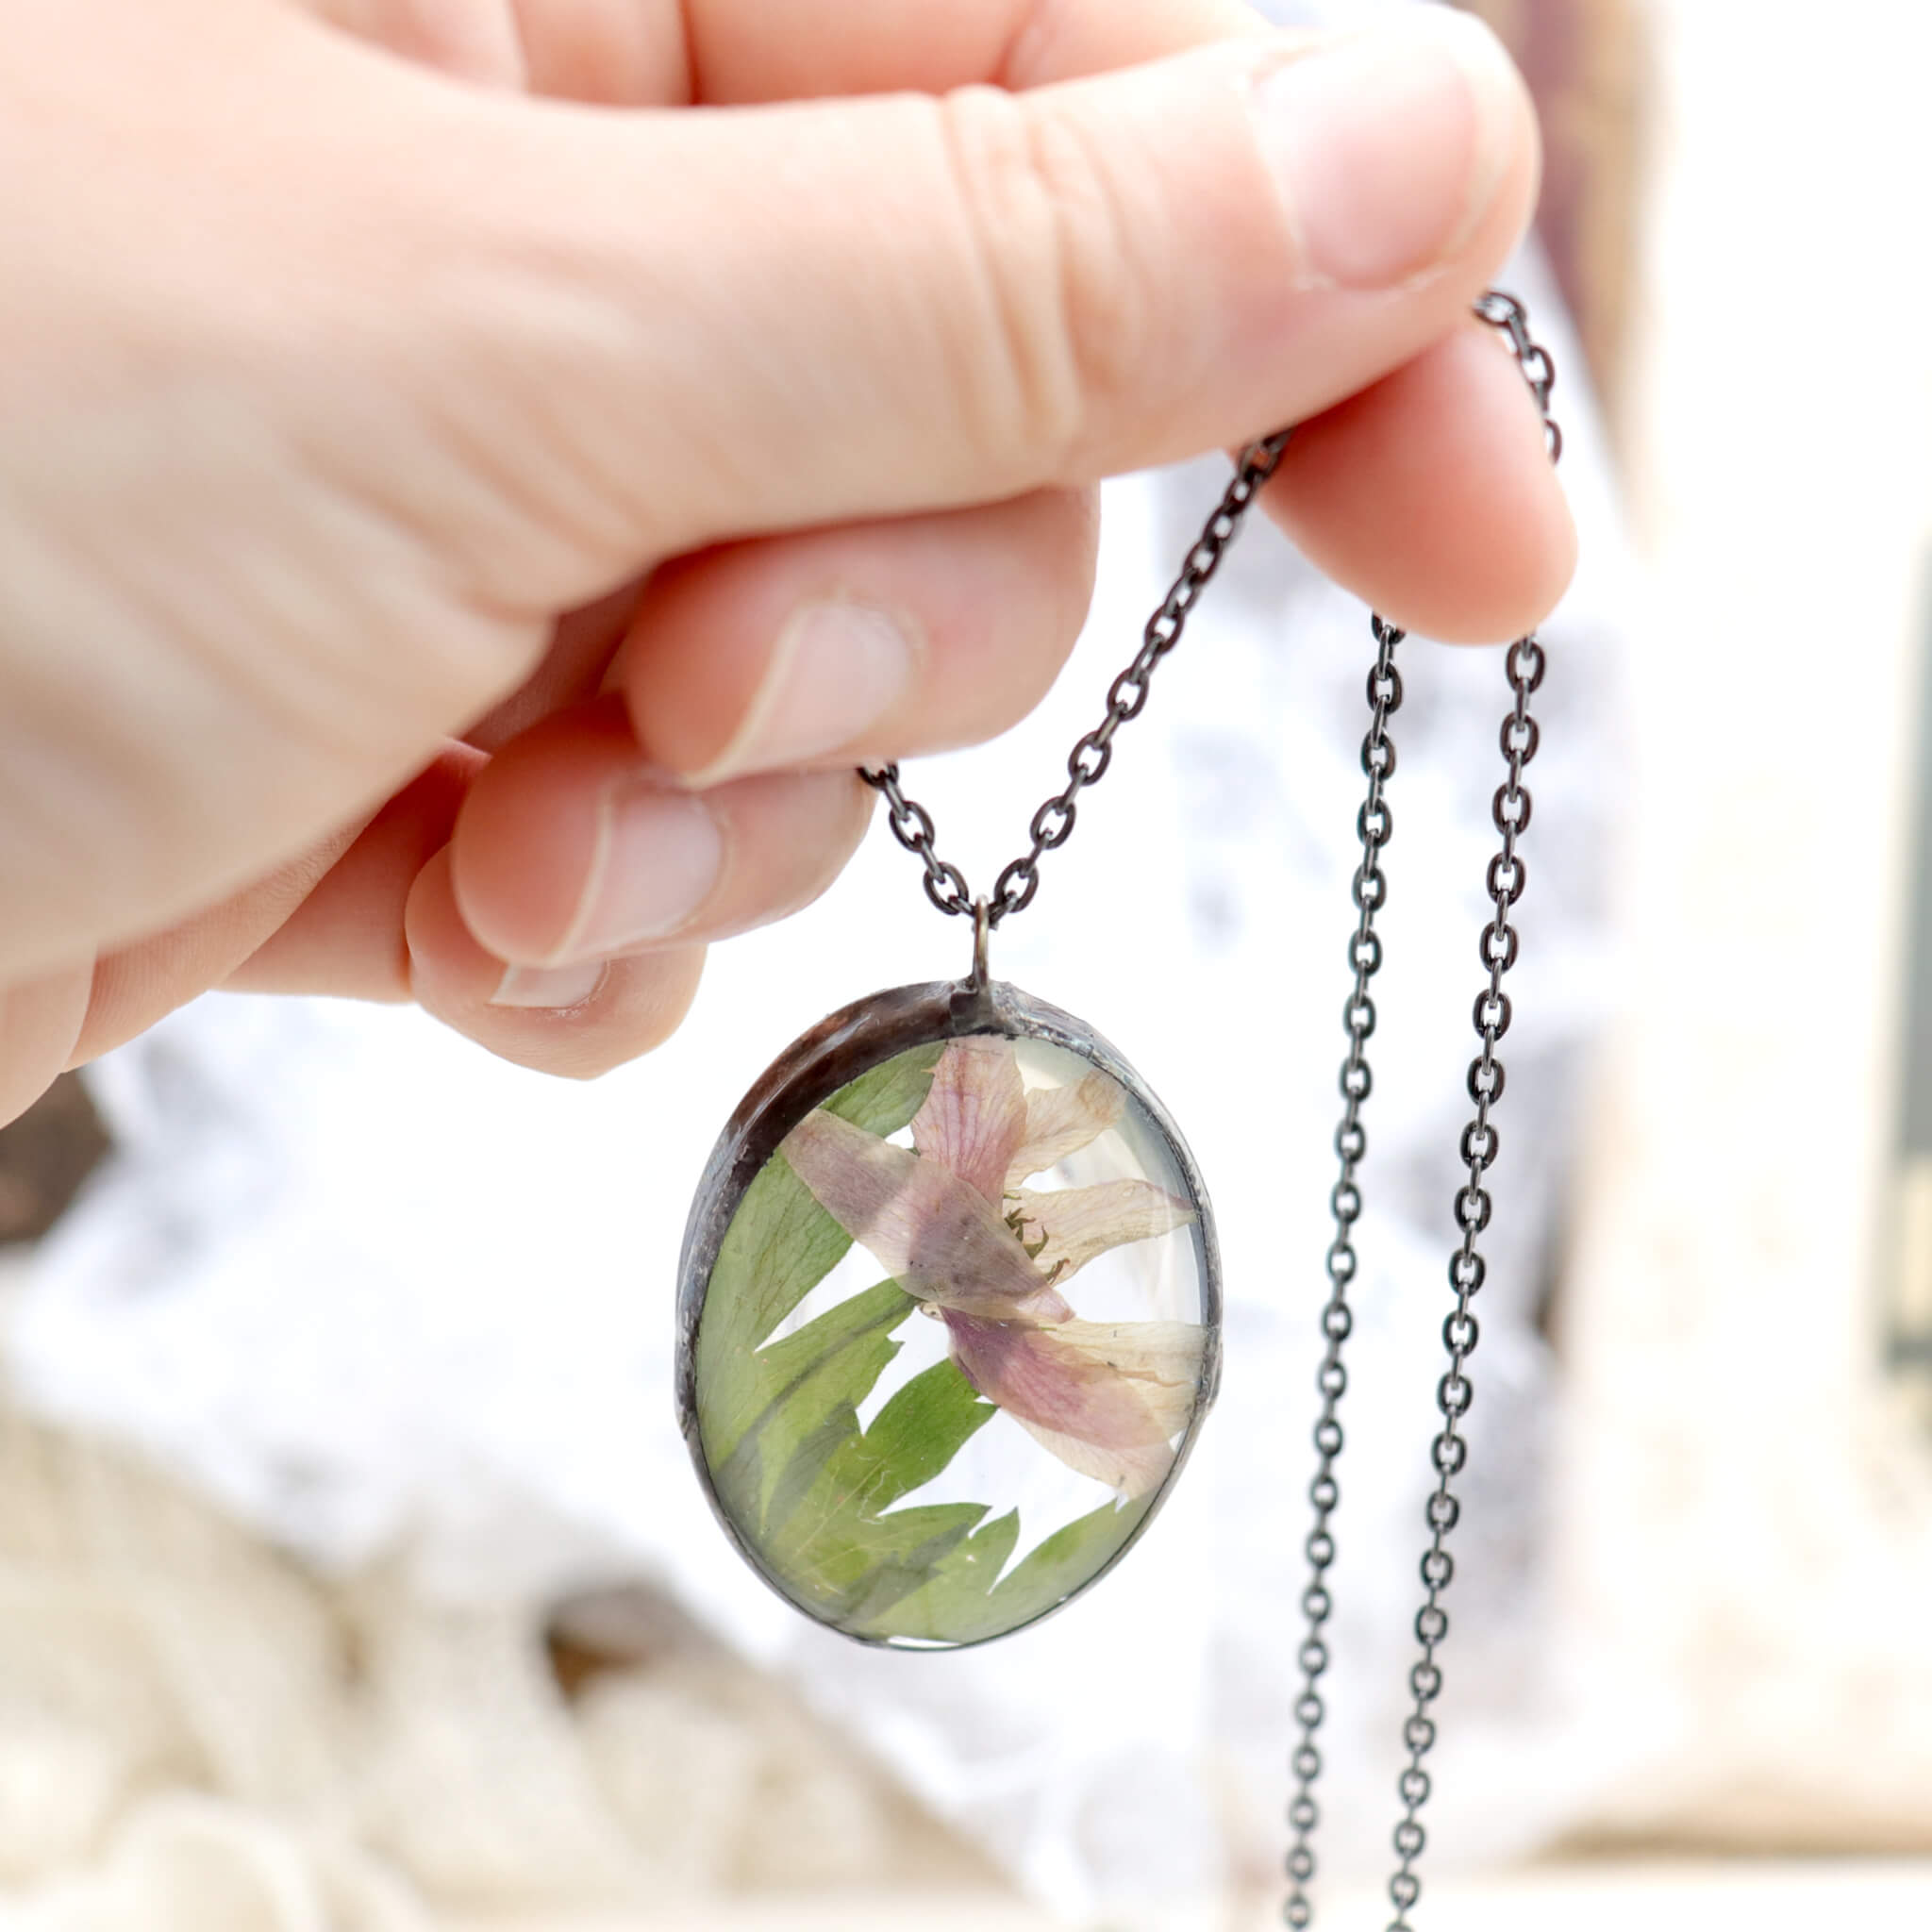 Hand holding oval shaped necklace featuring pink pressed flowers with green leaves